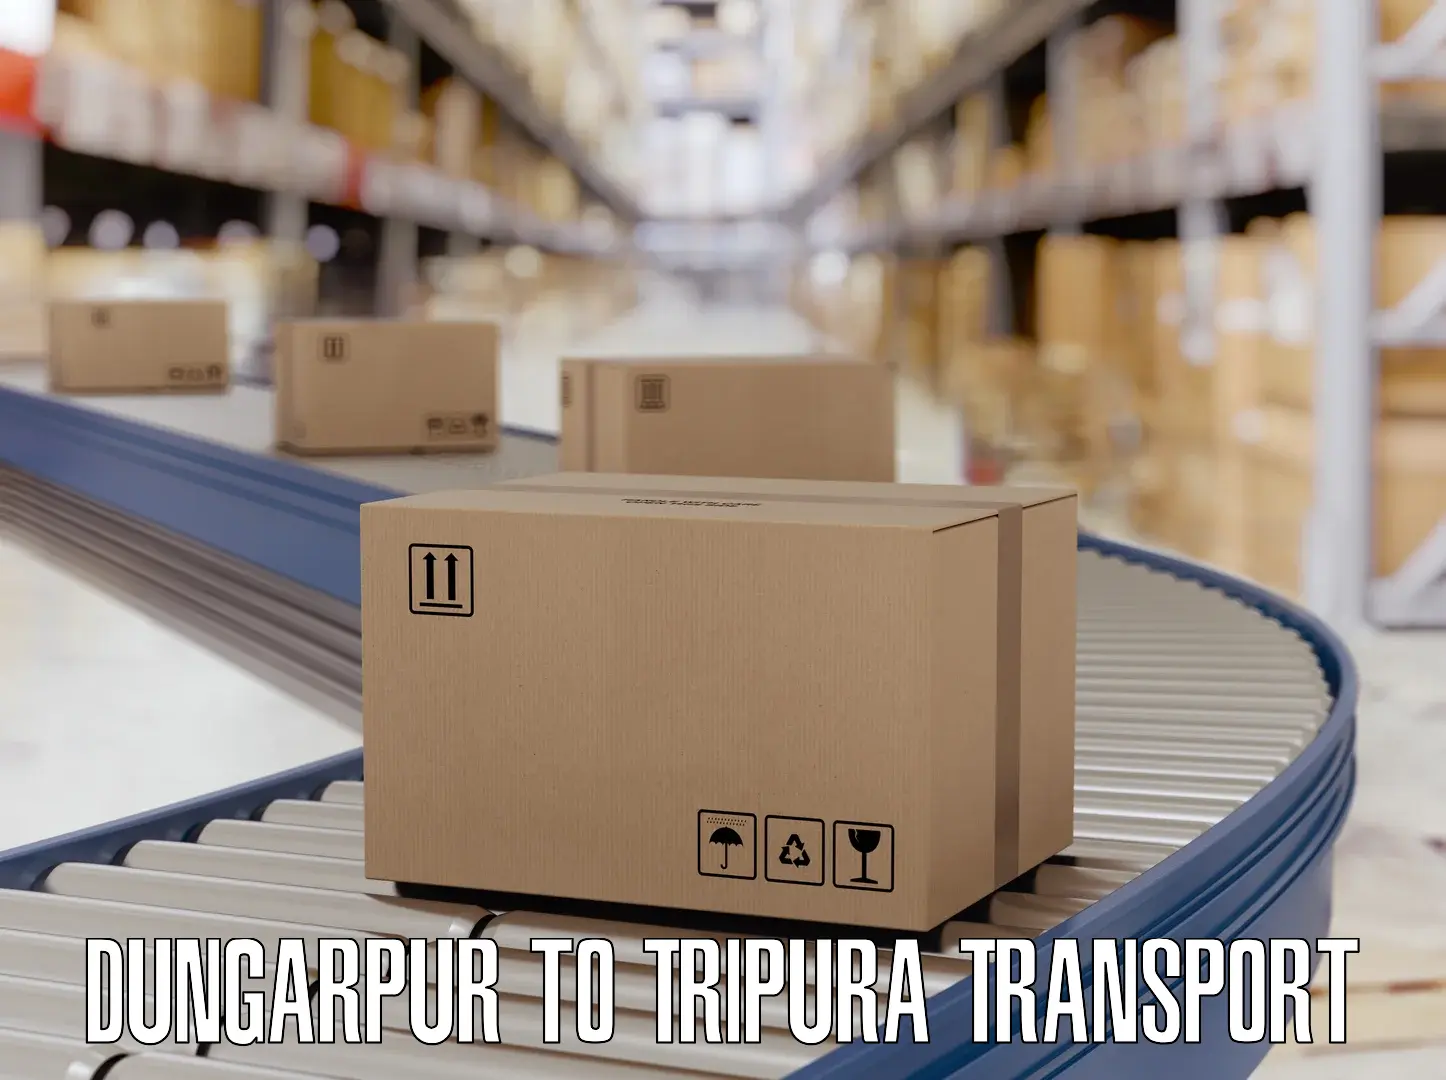 Luggage transport services in Dungarpur to Udaipur Tripura